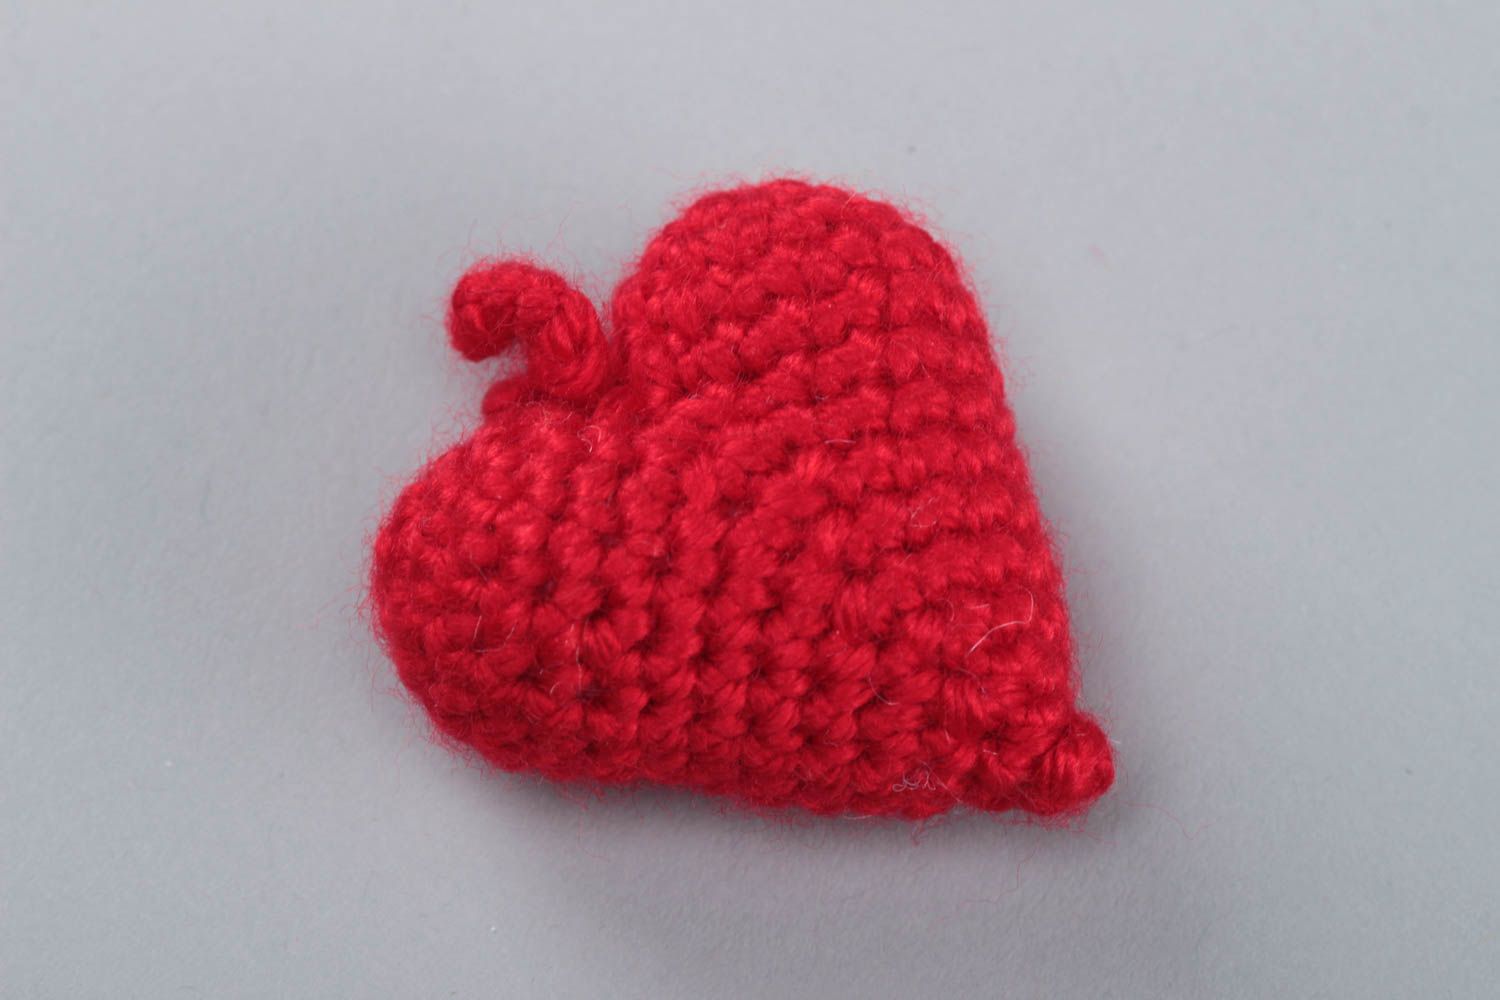 Handmade small crochet soft toy red heart with eyelet for kids and interior decor photo 2